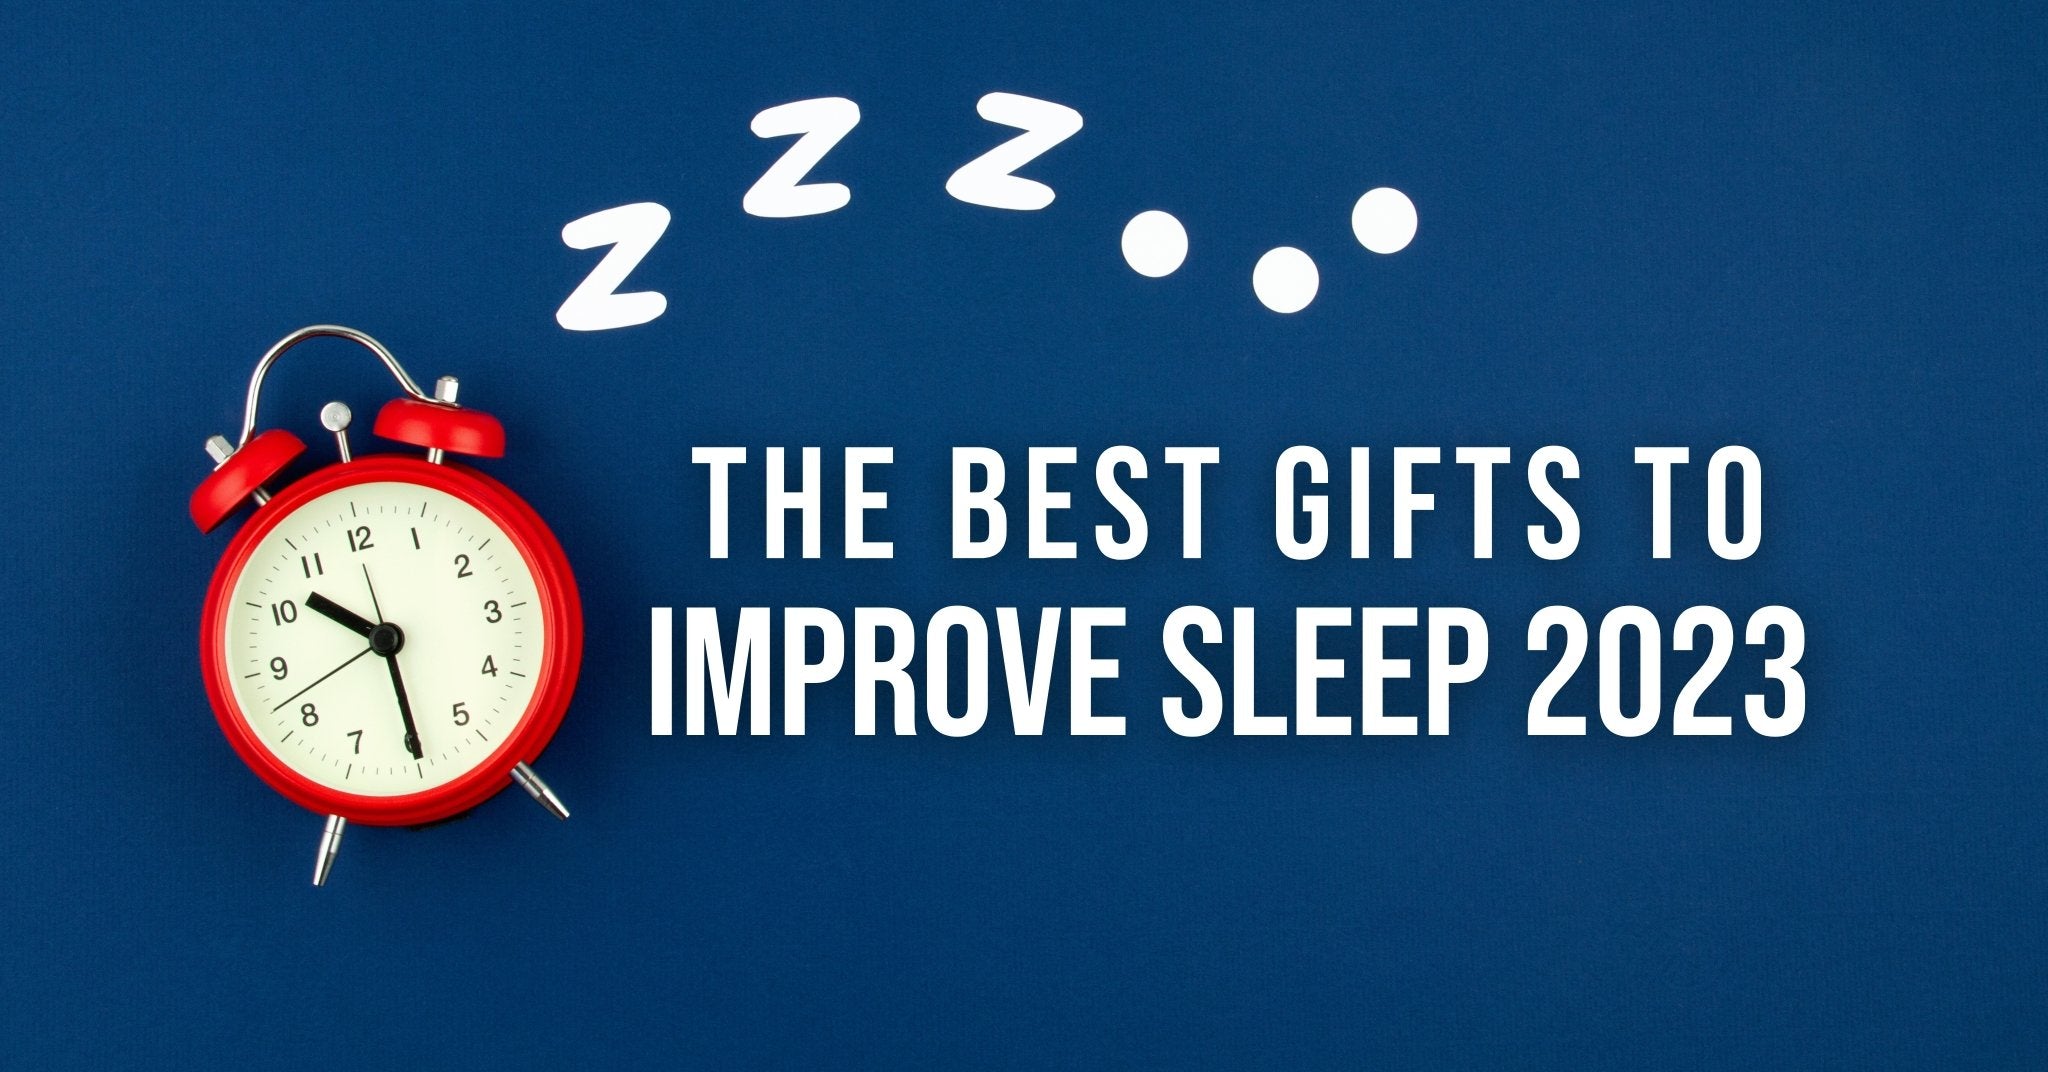 22 Sleep Product Gifts For the Insomniac in Your Life